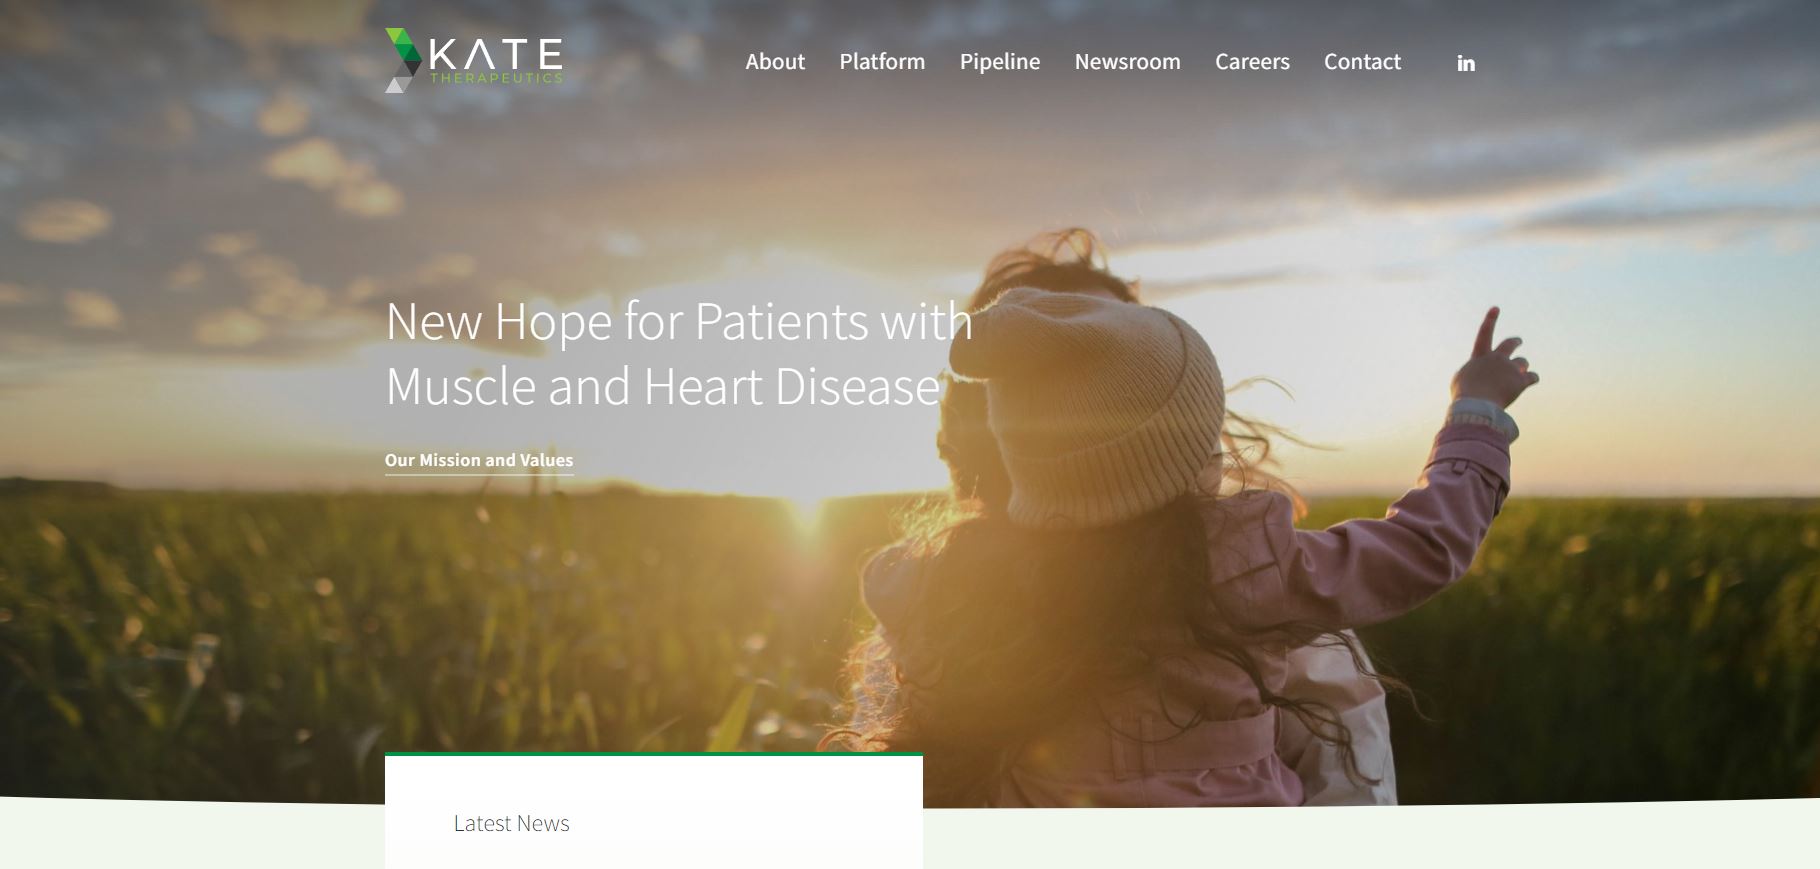 With an impressive $51M raised in Series A funding, Kate Therapeutics is at the forefront of developing groundbreaking AAV-based gene therapies